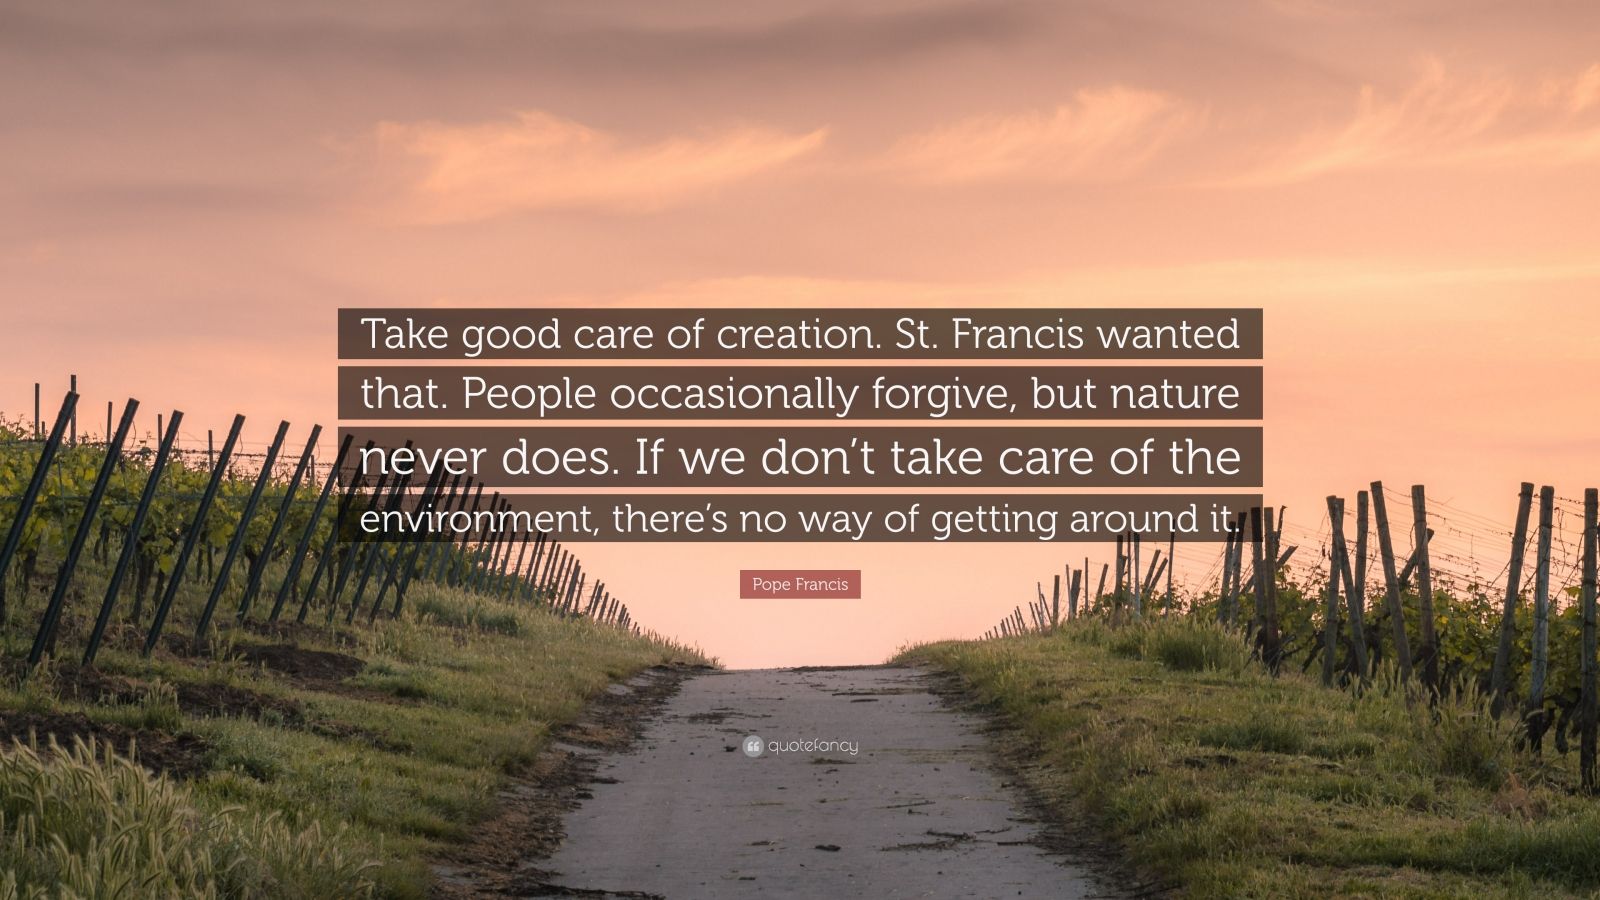 Pope Francis Quote: “Take good care of creation. St. Francis wanted